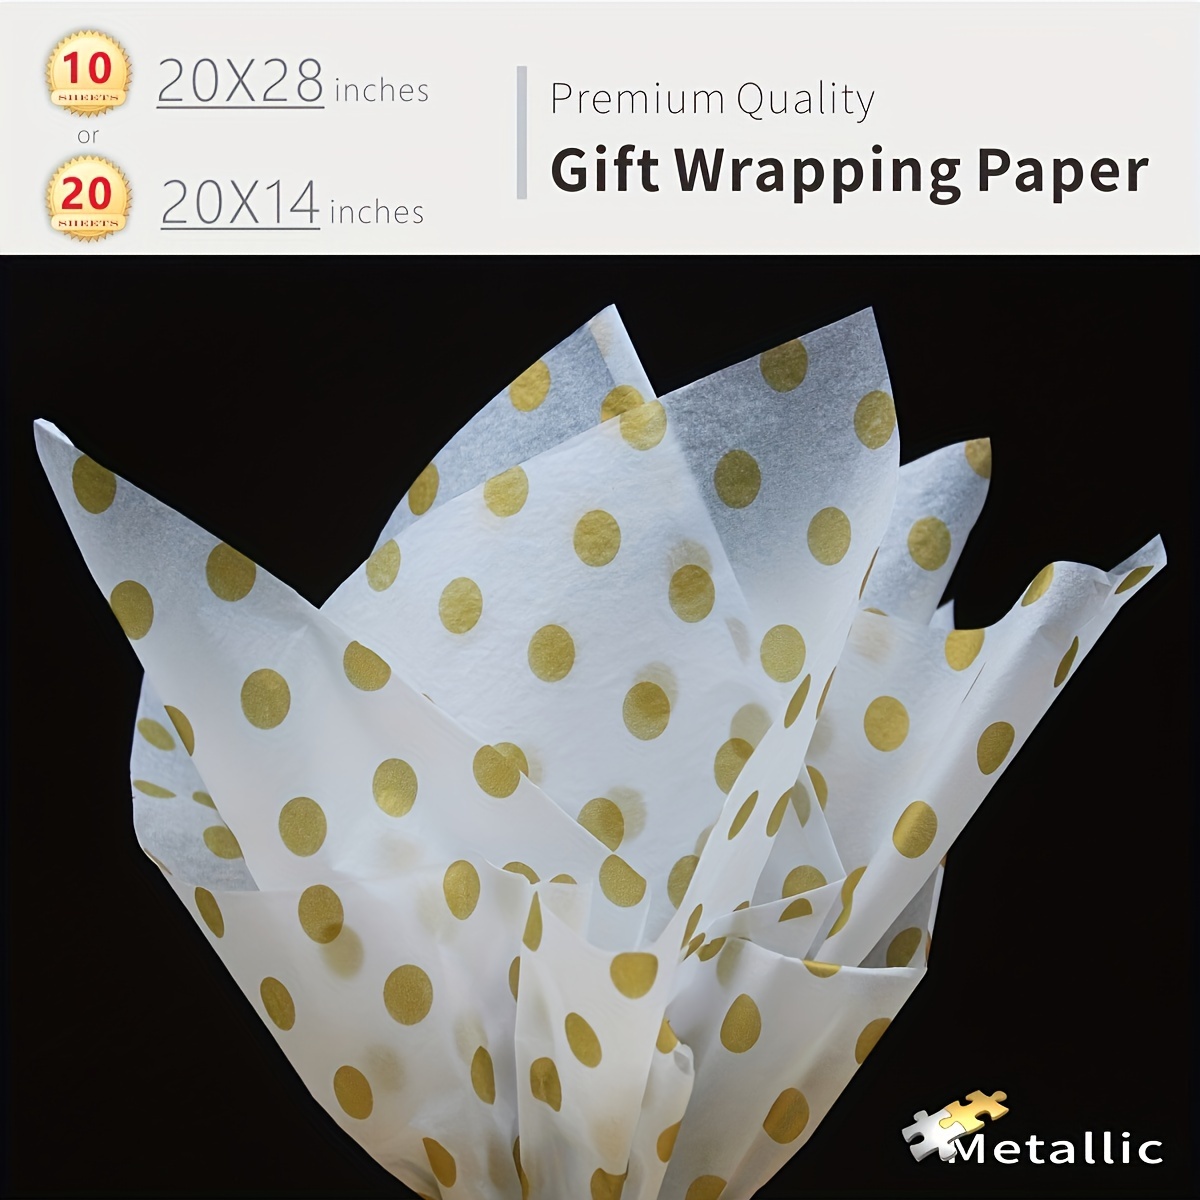  100 Sheets 14X20 Metallic Gift Wrapping Gold Tissue Paper  Bulk for Christmas, Mother's Day, Birthday Gift Bags Packaging Craft :  Health & Household